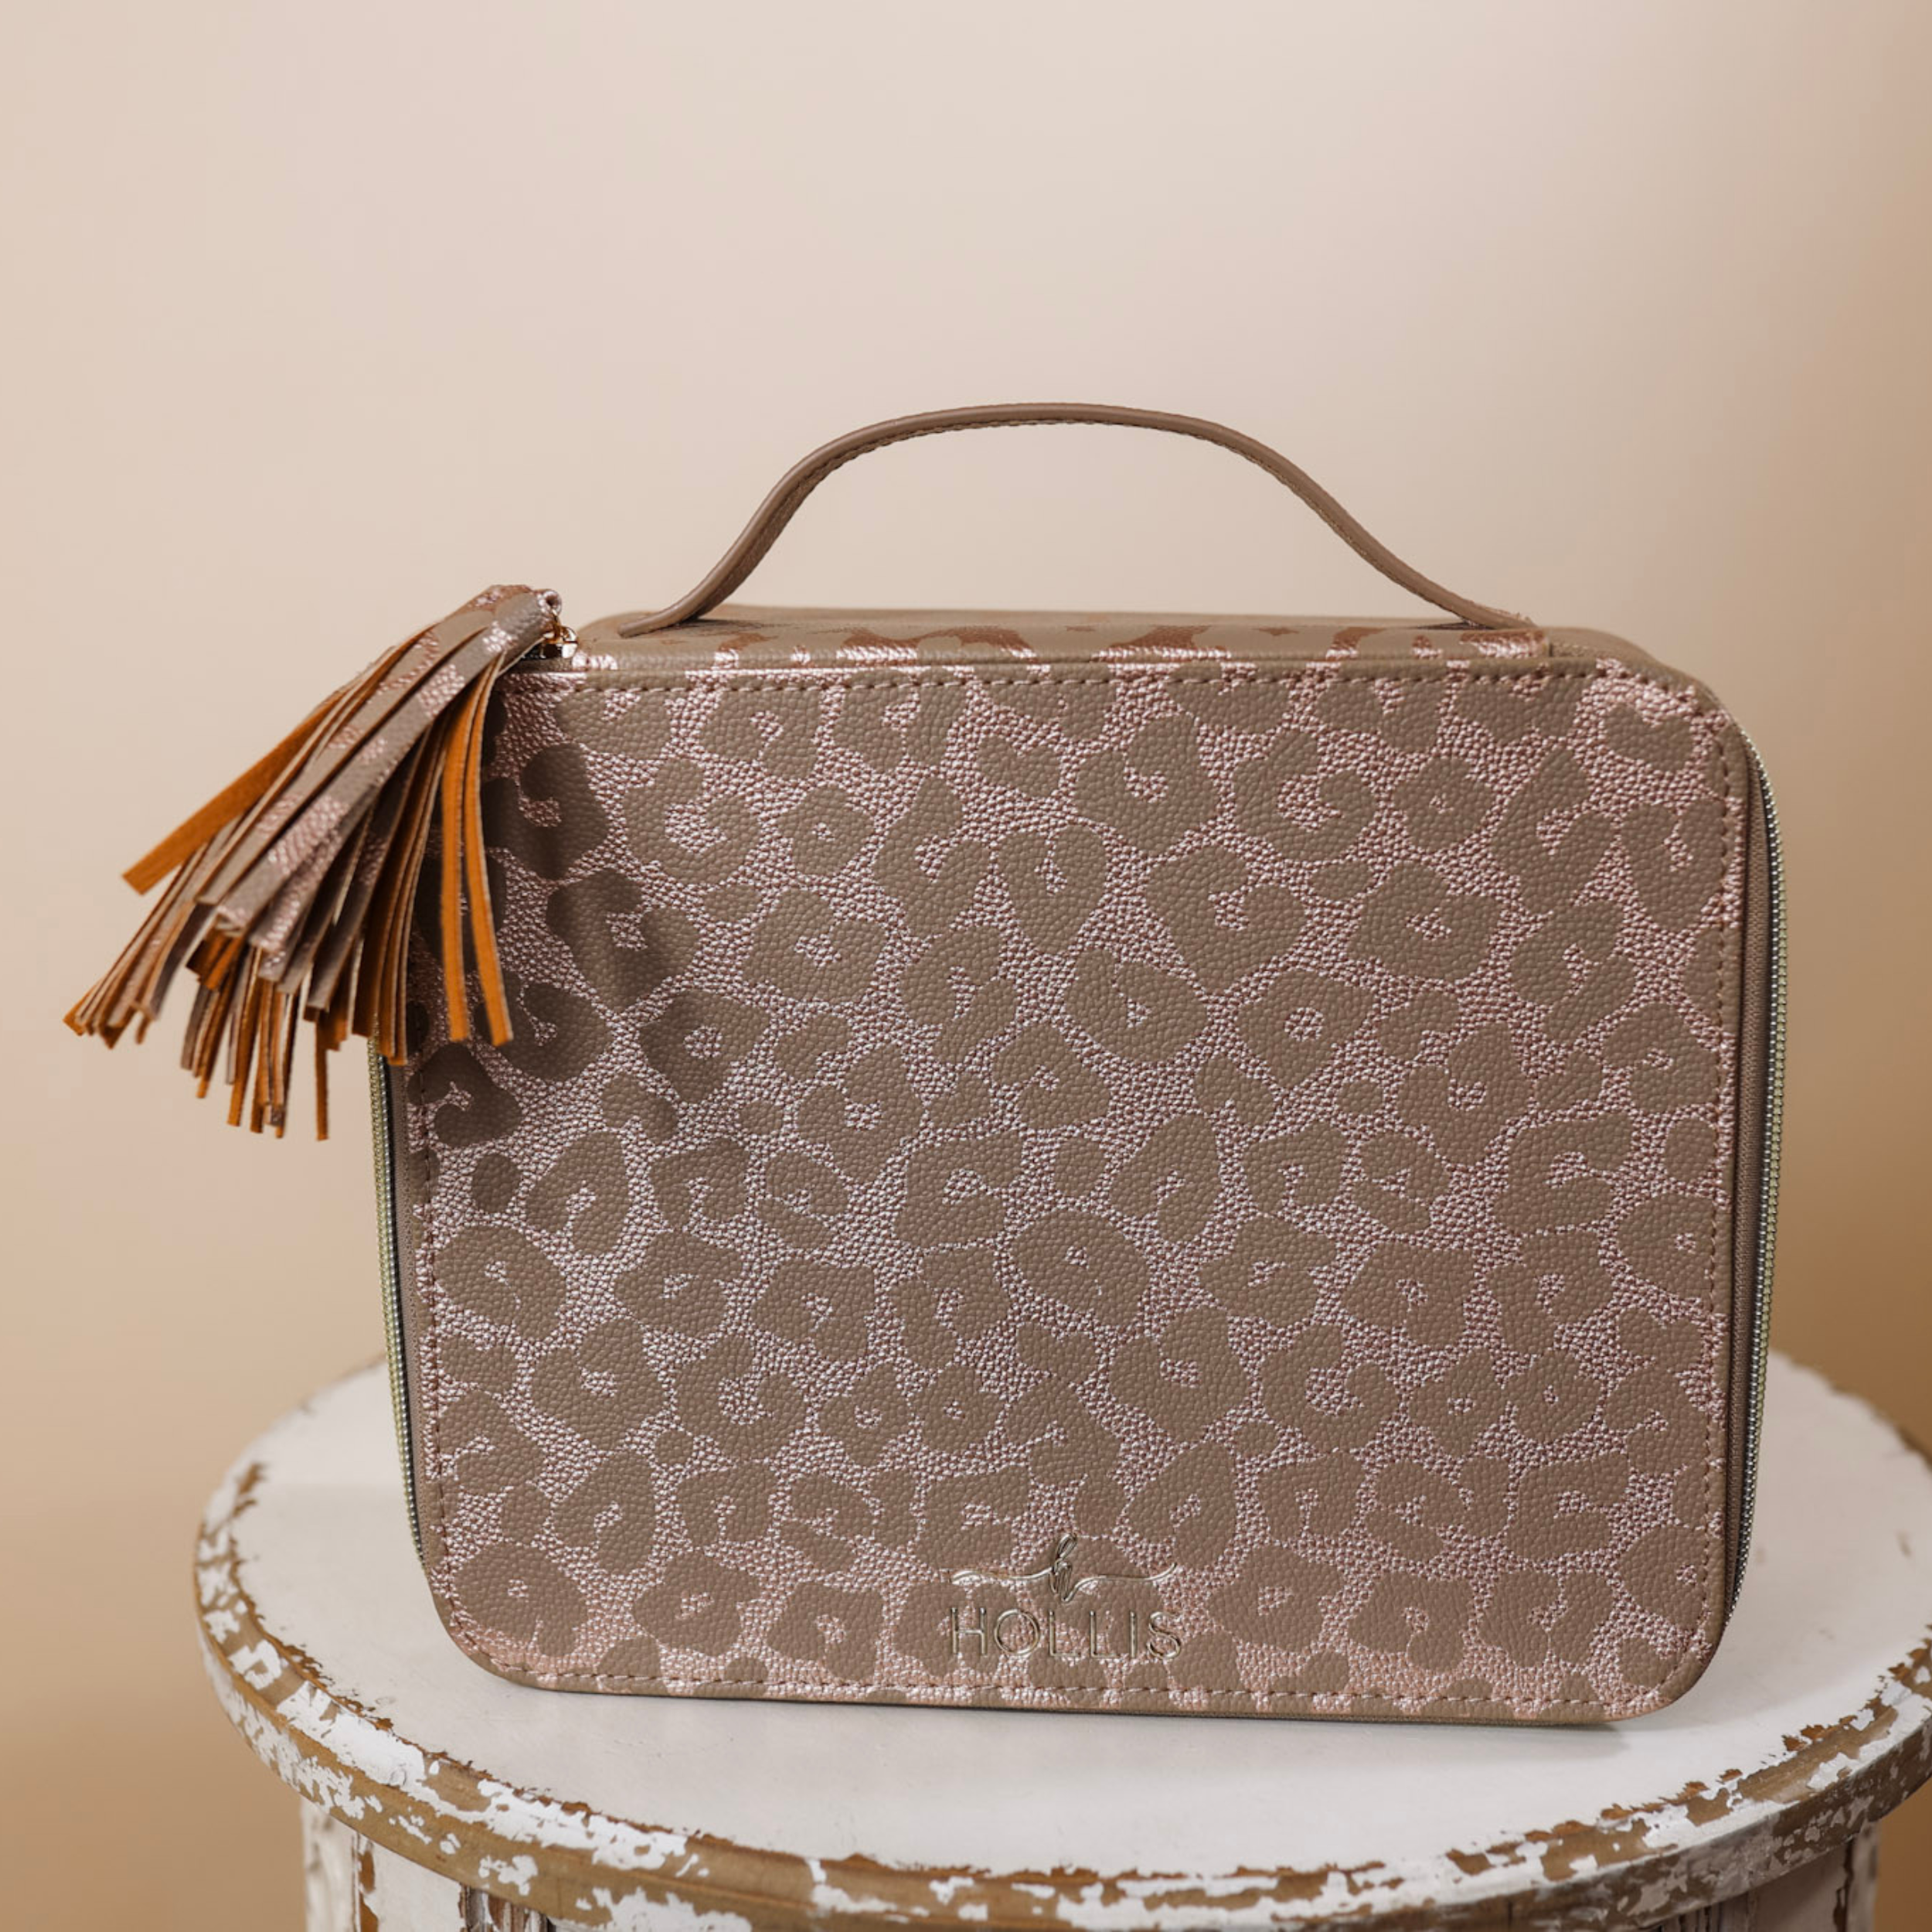 A metallic leopard bag with tassels and a handle is sitting in the middle of the picture. Background is solid tan. 